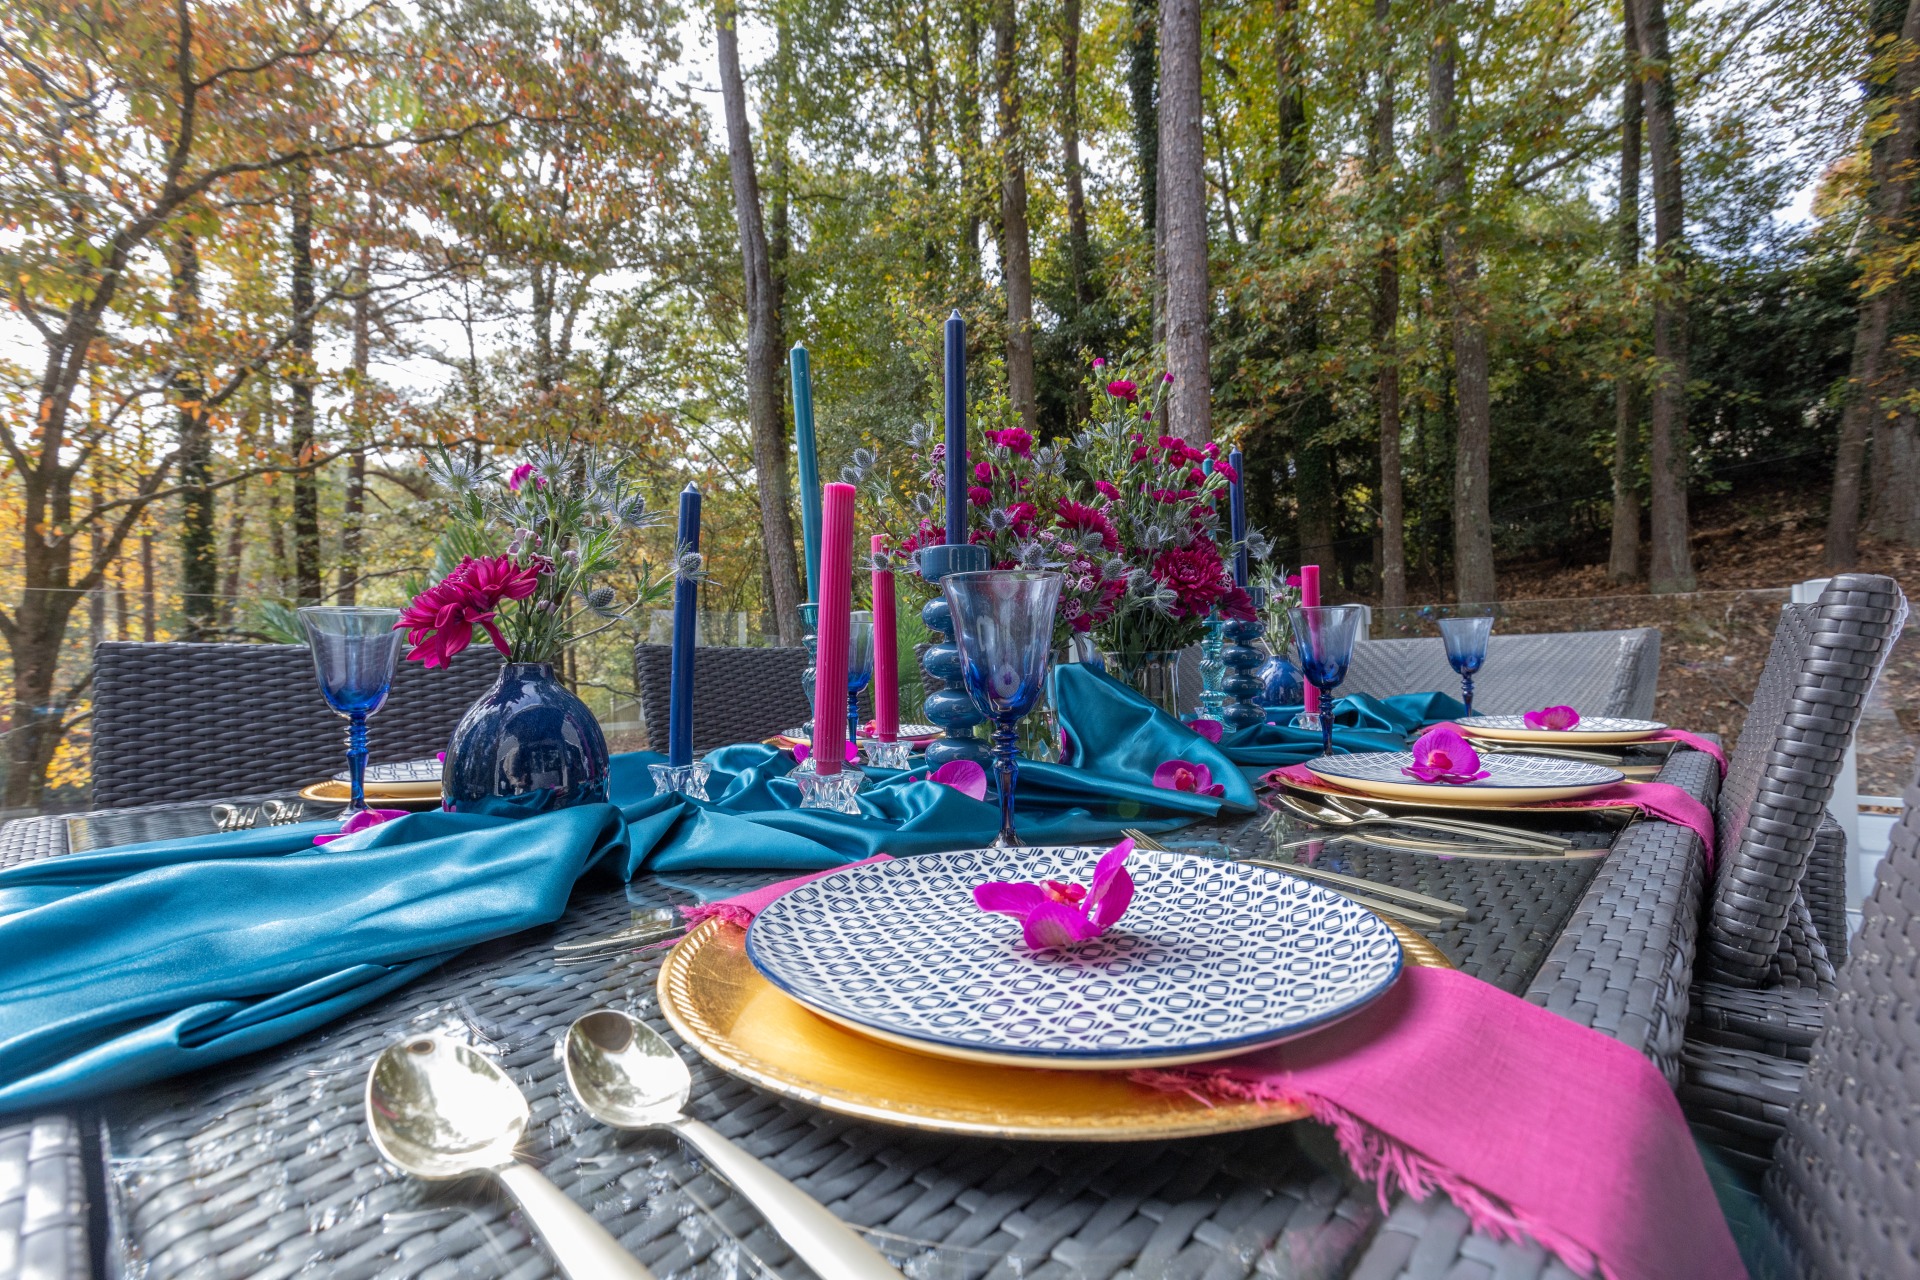 Dining table set up outdoors